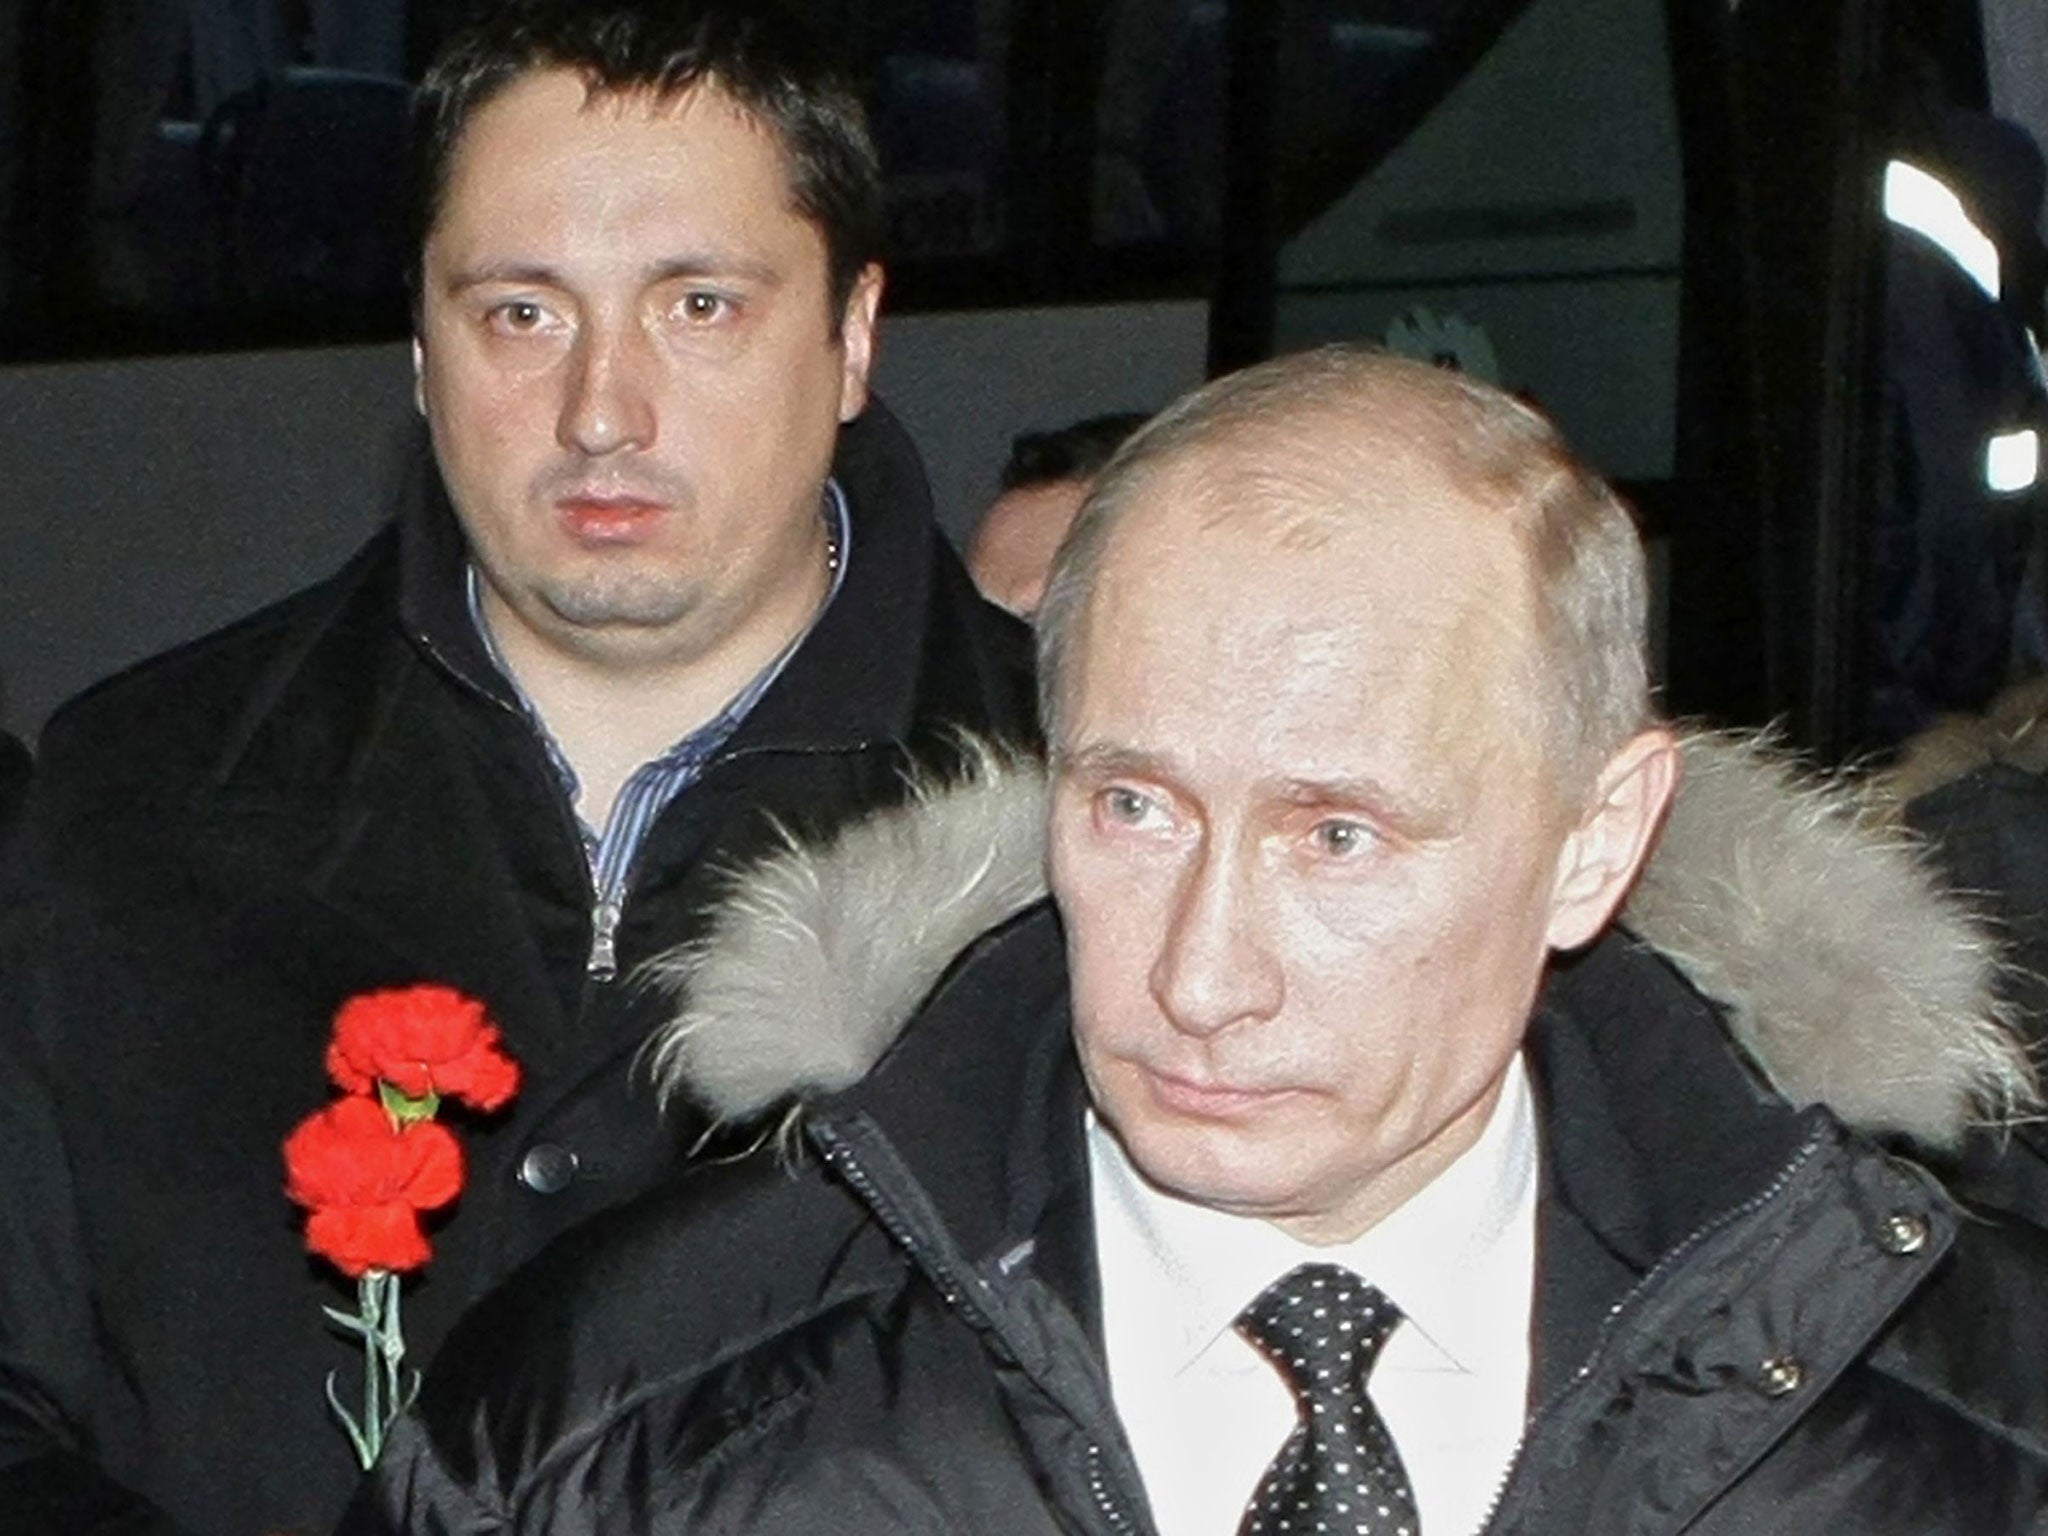 This file photo taken on December 21, 2010 shows then Russian Prime Minister Vladimir Putin (R) and Russia's football supporters association head Alexander Shprygin walking to lay flowers at the grave of slain Spartak Moscow fan Yegor Sviridov in Moscow